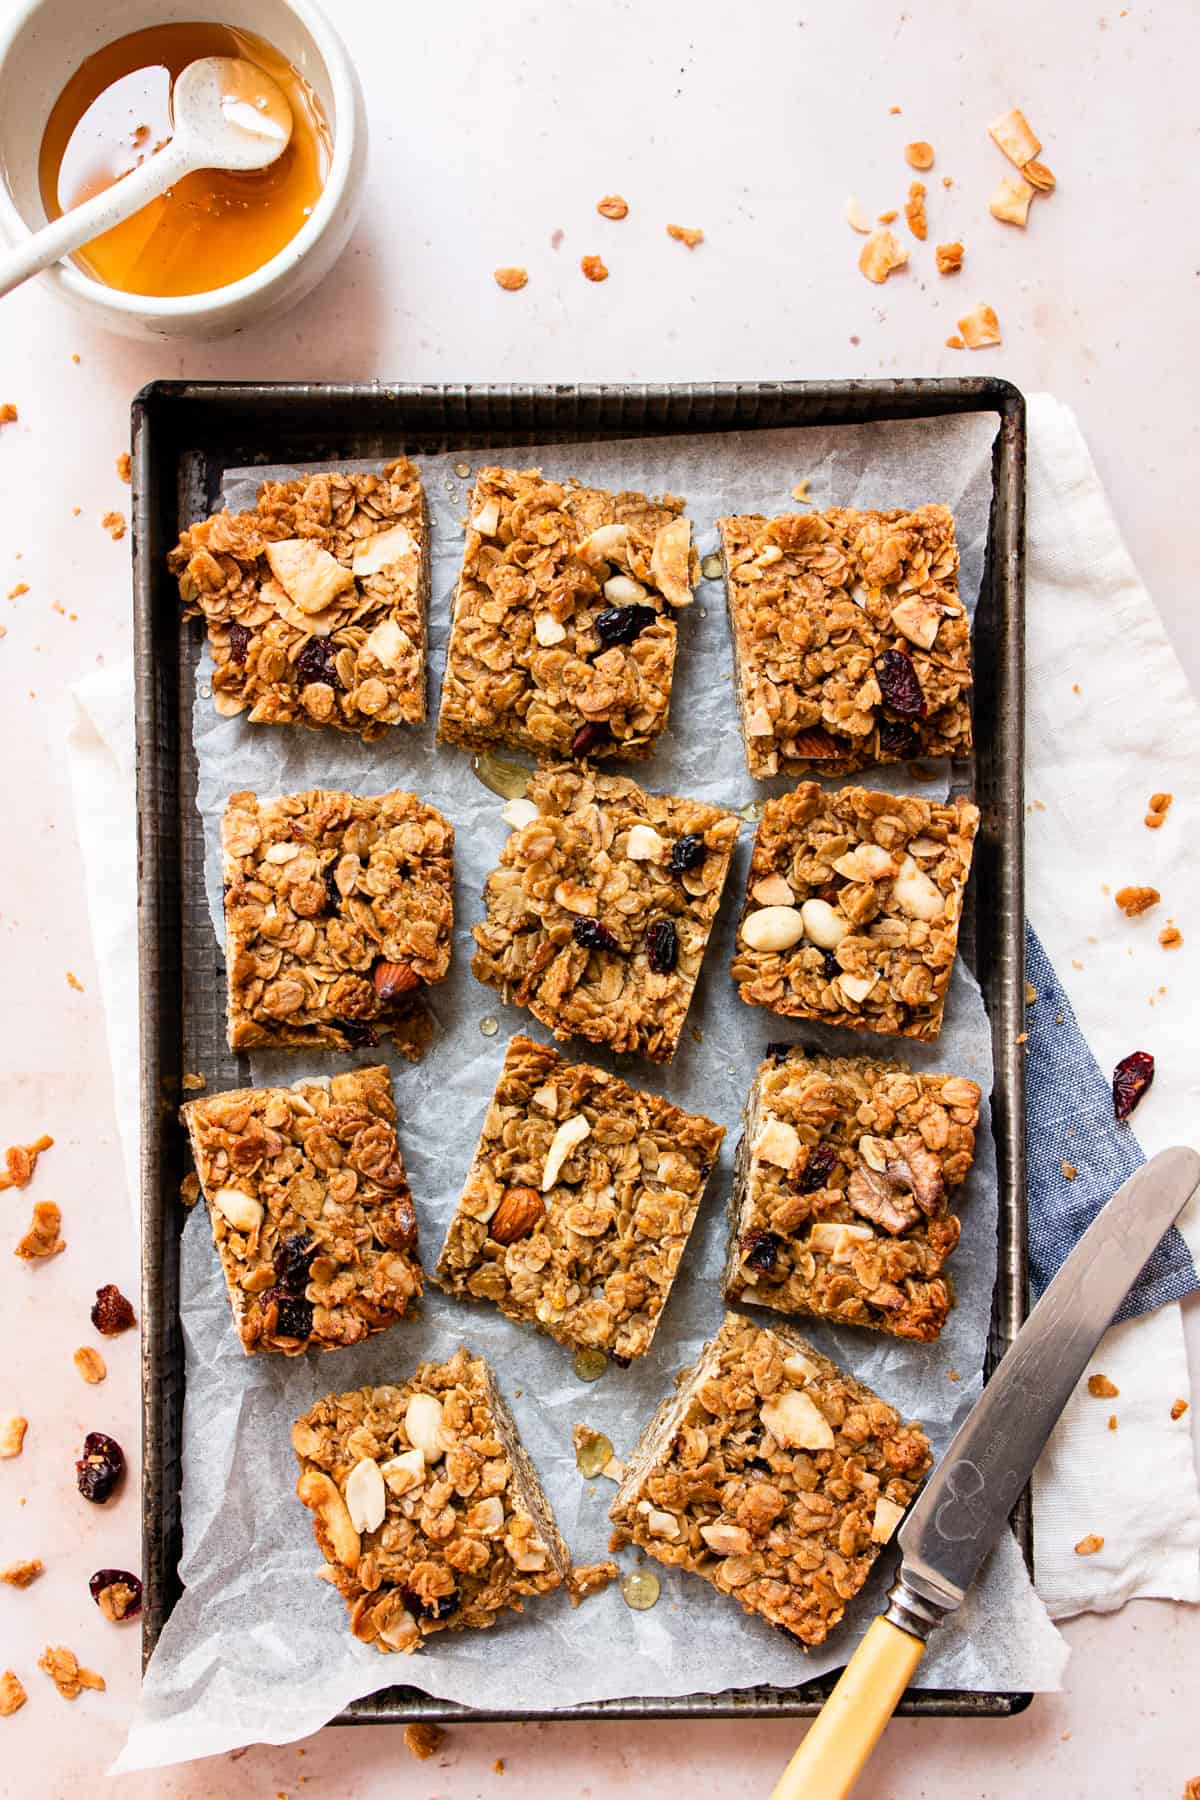 Healthy flapjacks on a baking tray with honey and nuts.